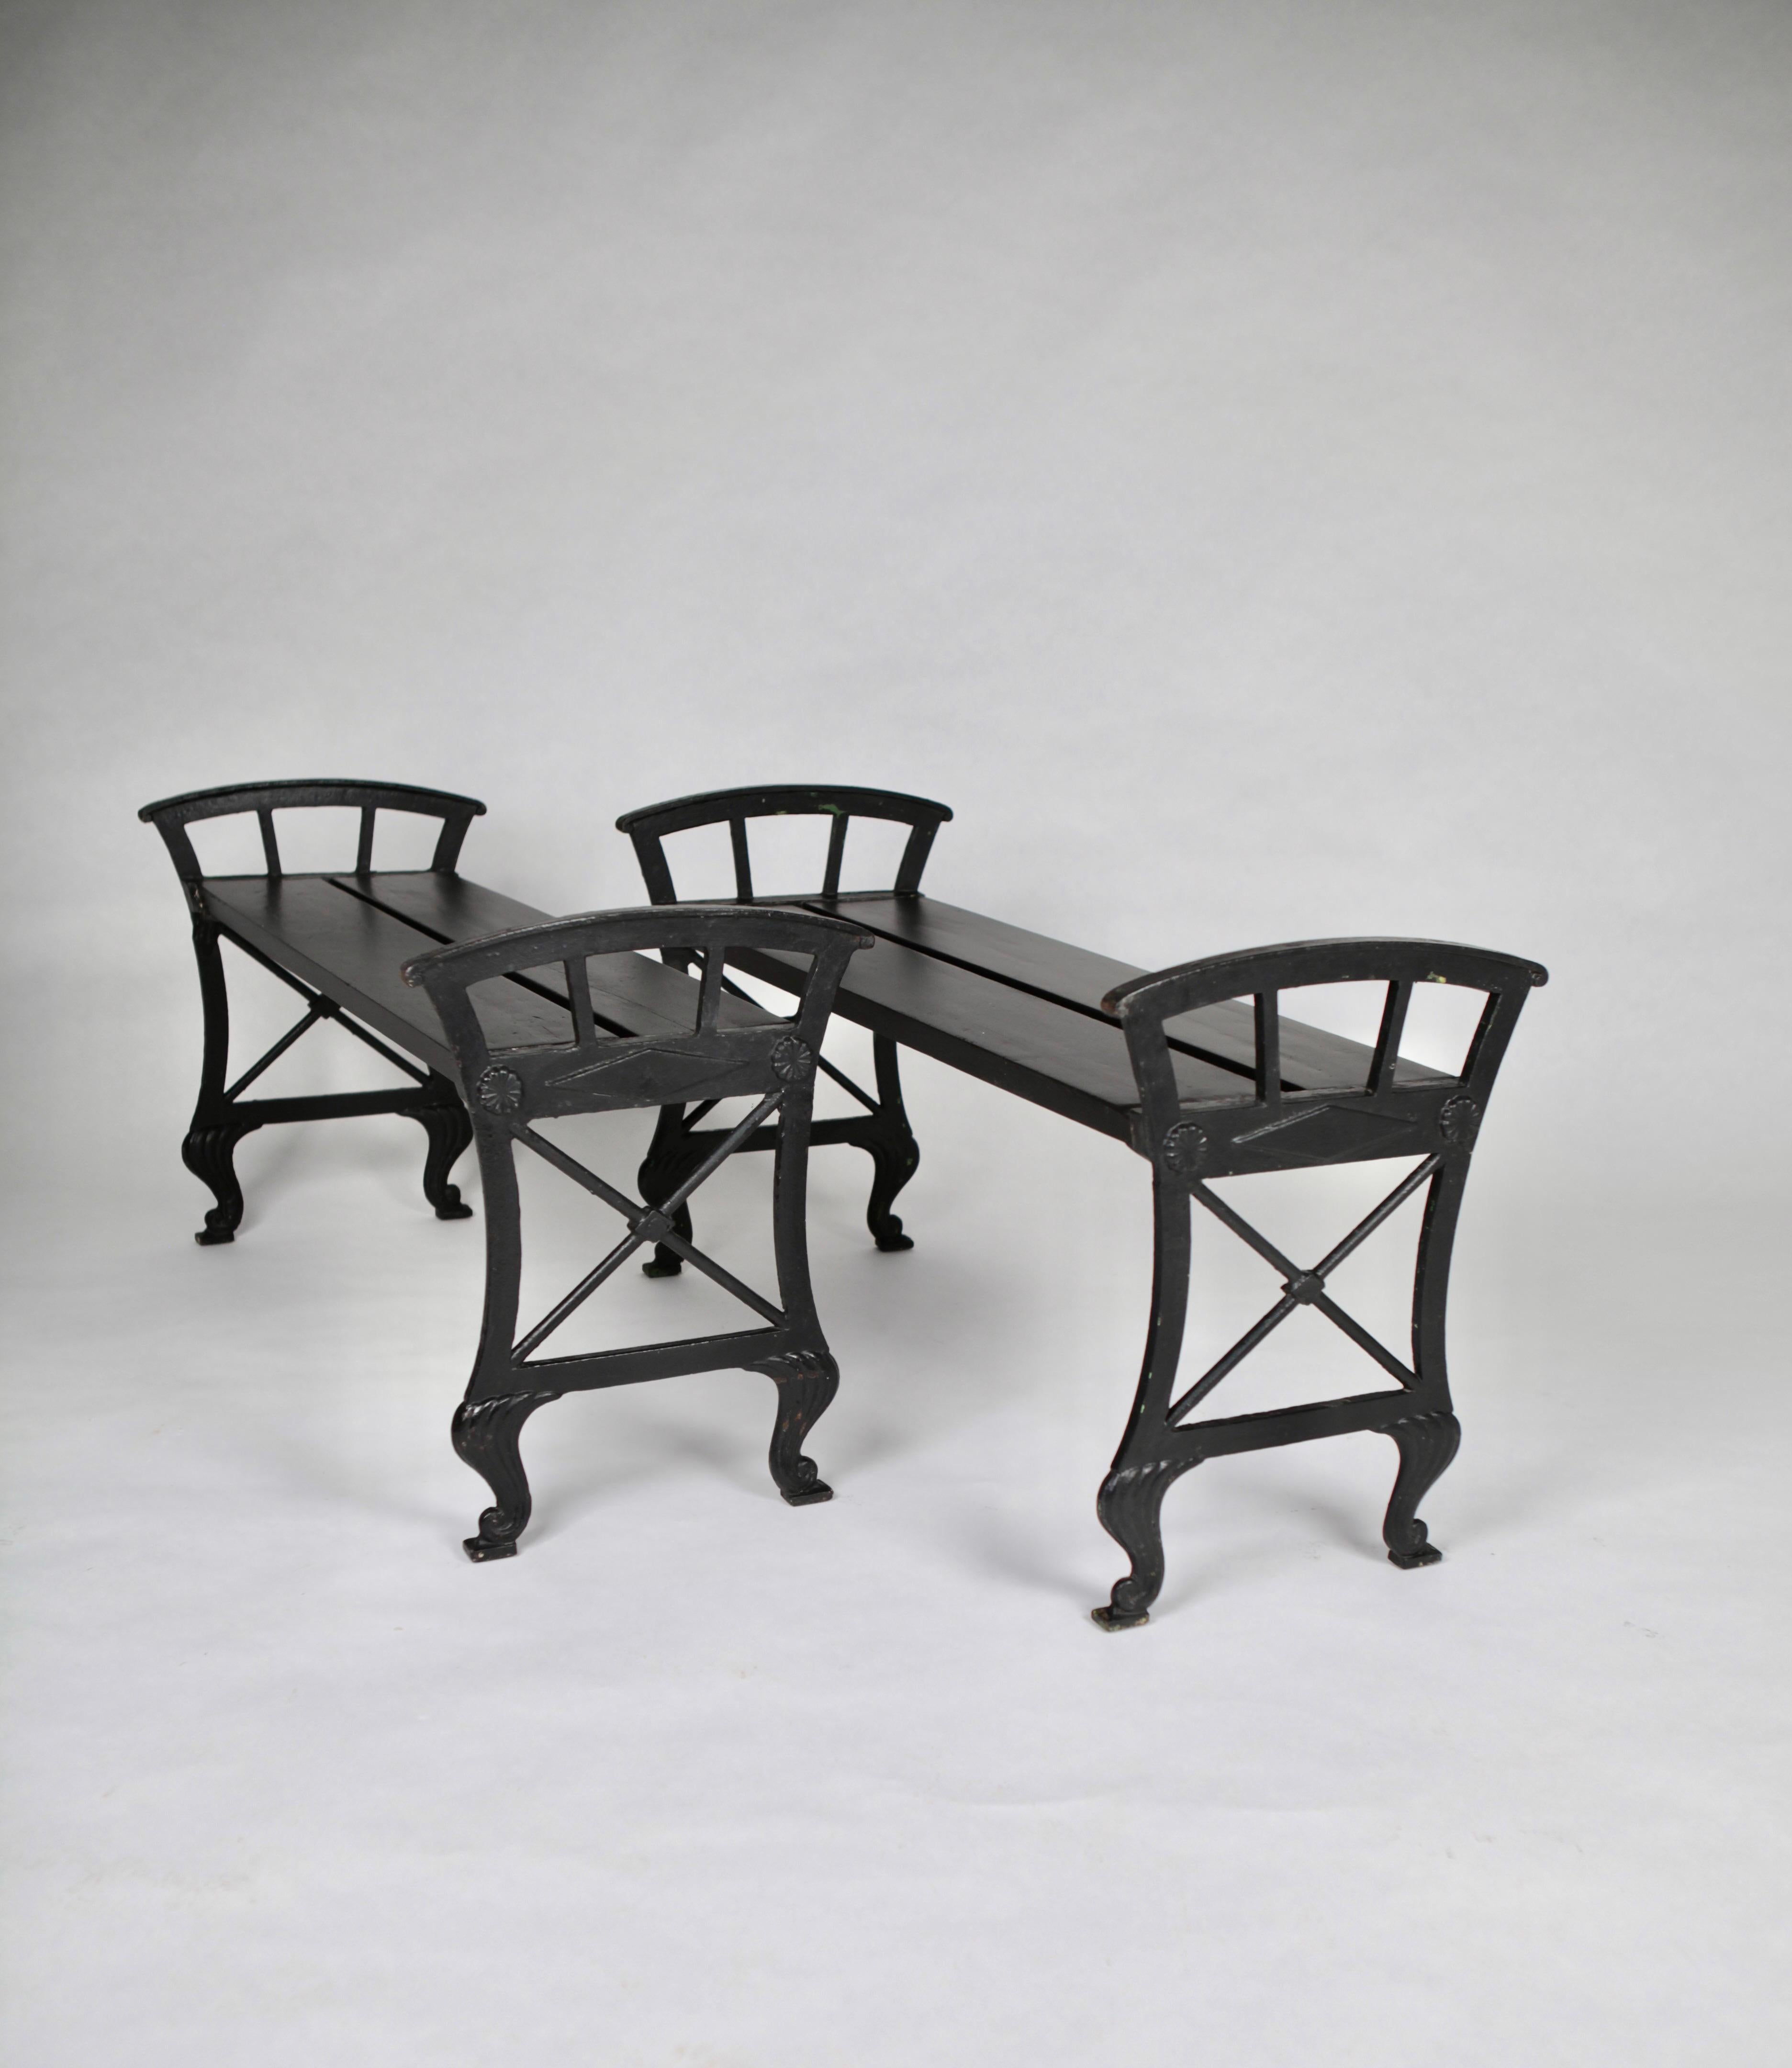 Folke Bensow, rare pair of 'Park Benches Nr. 2', designed in 1925, executed by Näfequarns Bruk in Sweden.
Black cast Iron and lacquered wood.
 